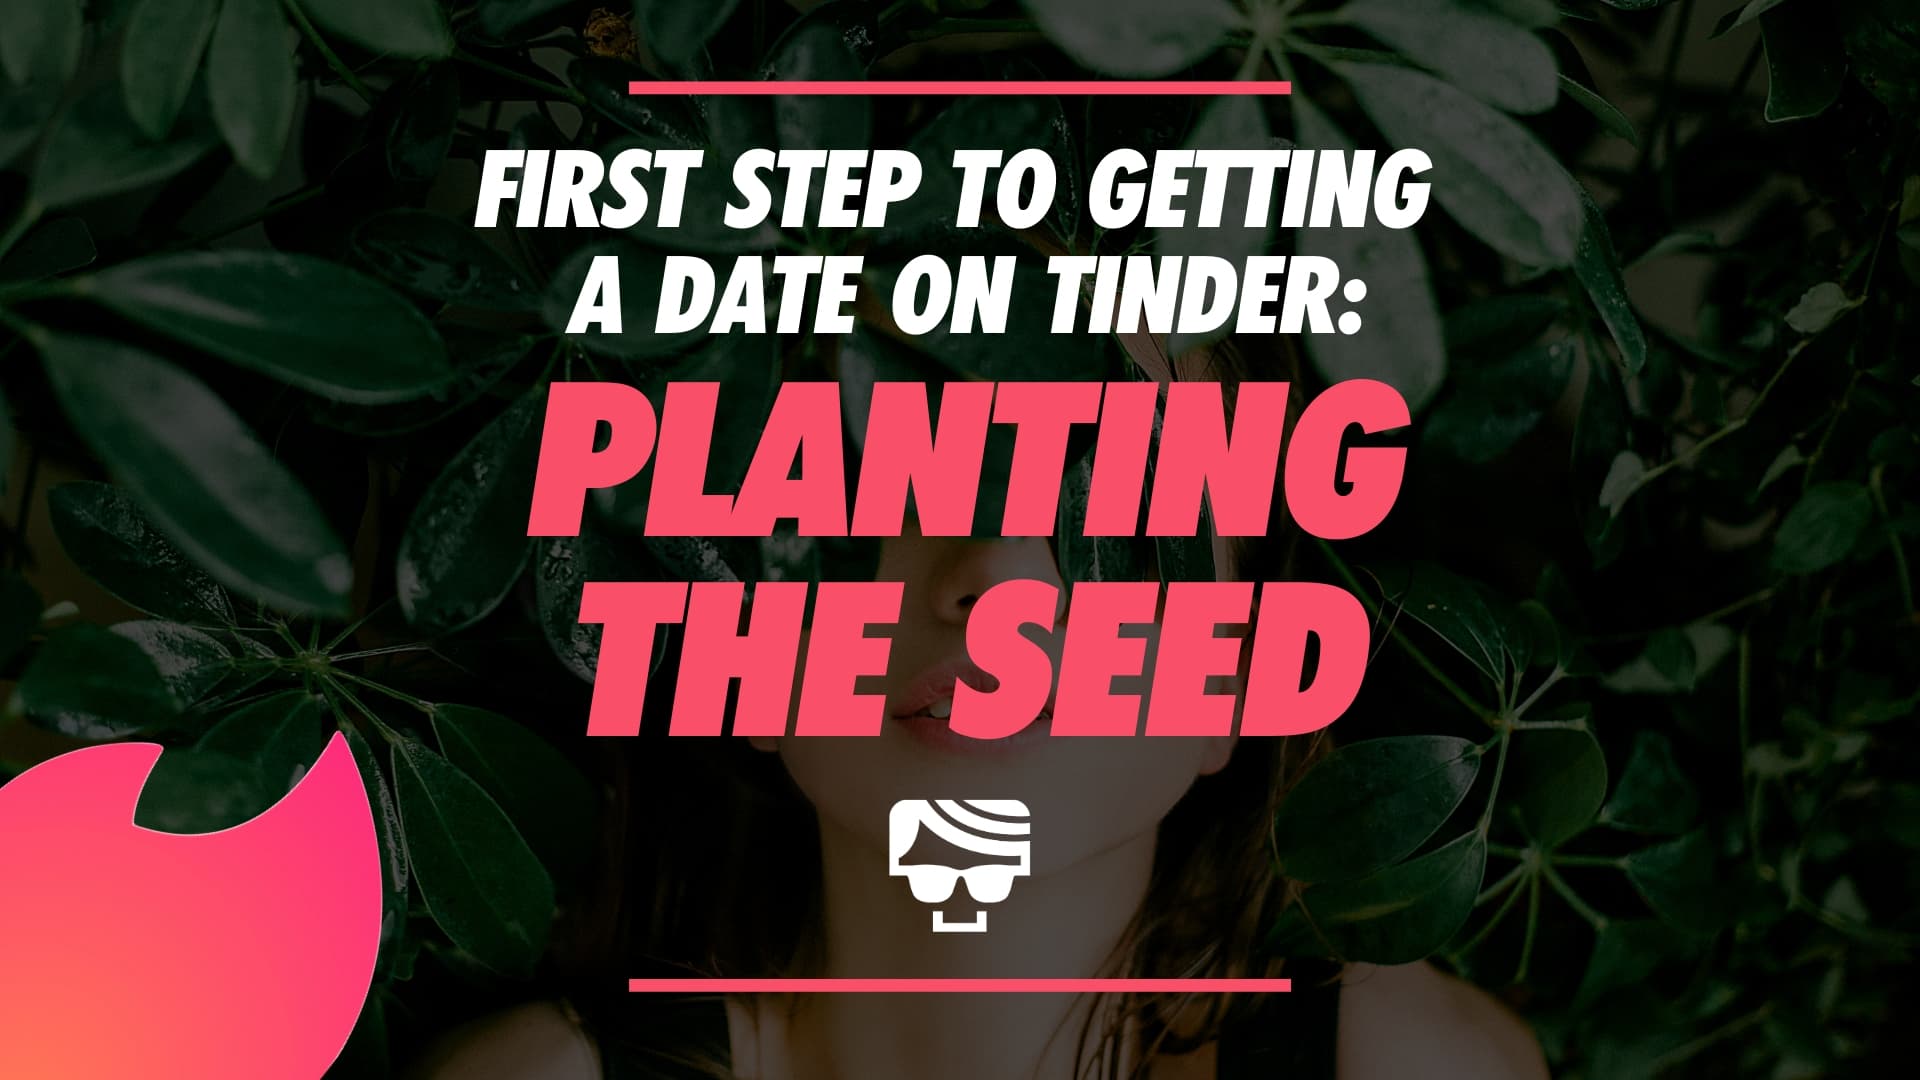 You Must Do This Before Asking A Girl Out Online - Plant The Seed’